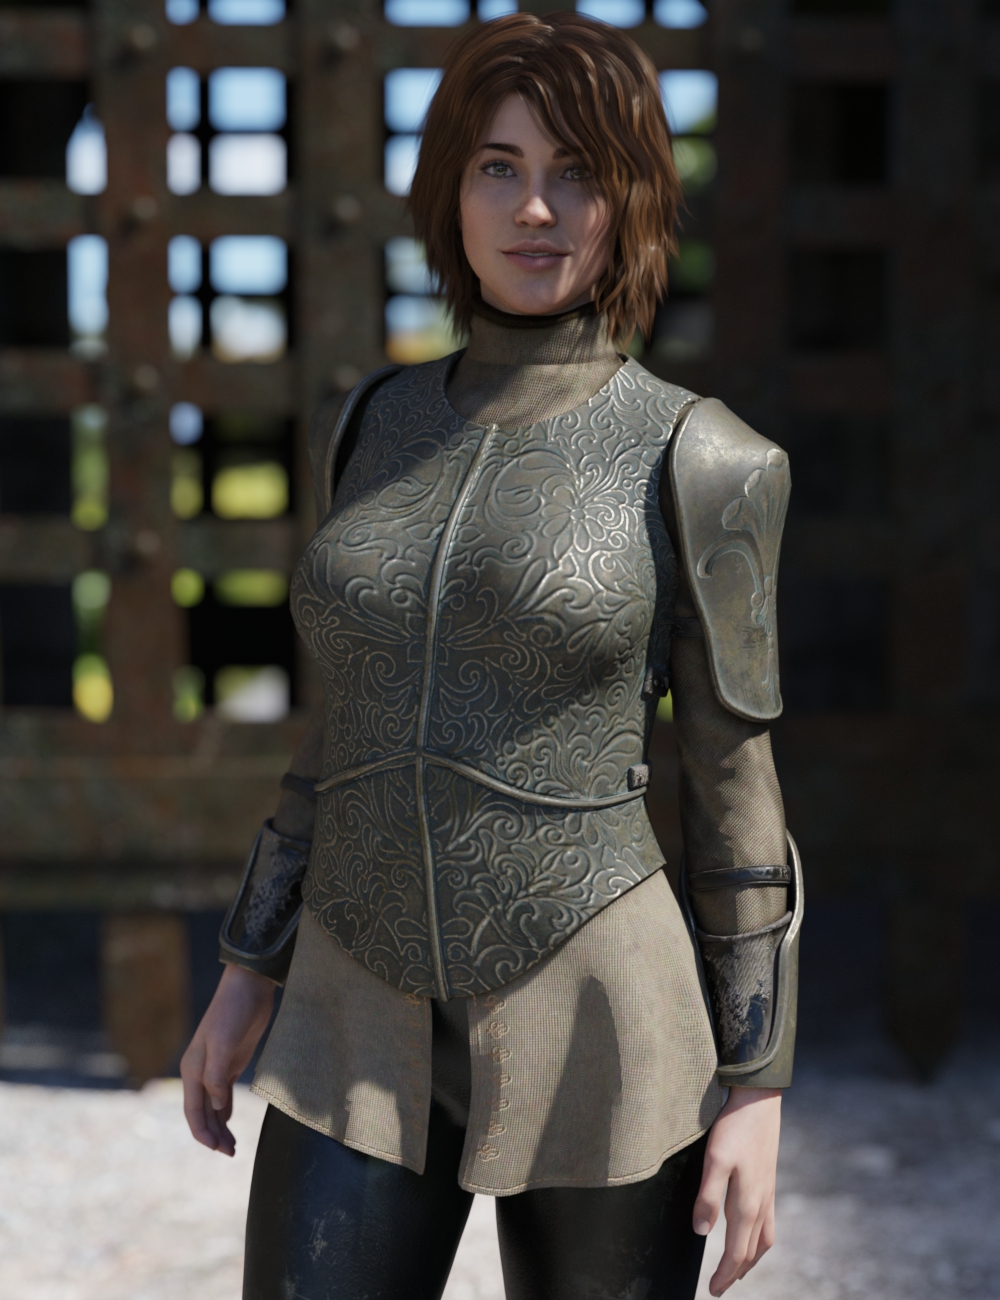 Maid At Arms Armor for Genesis 8 Female(s) by: Moonscape GraphicsSade, 3D Models by Daz 3D